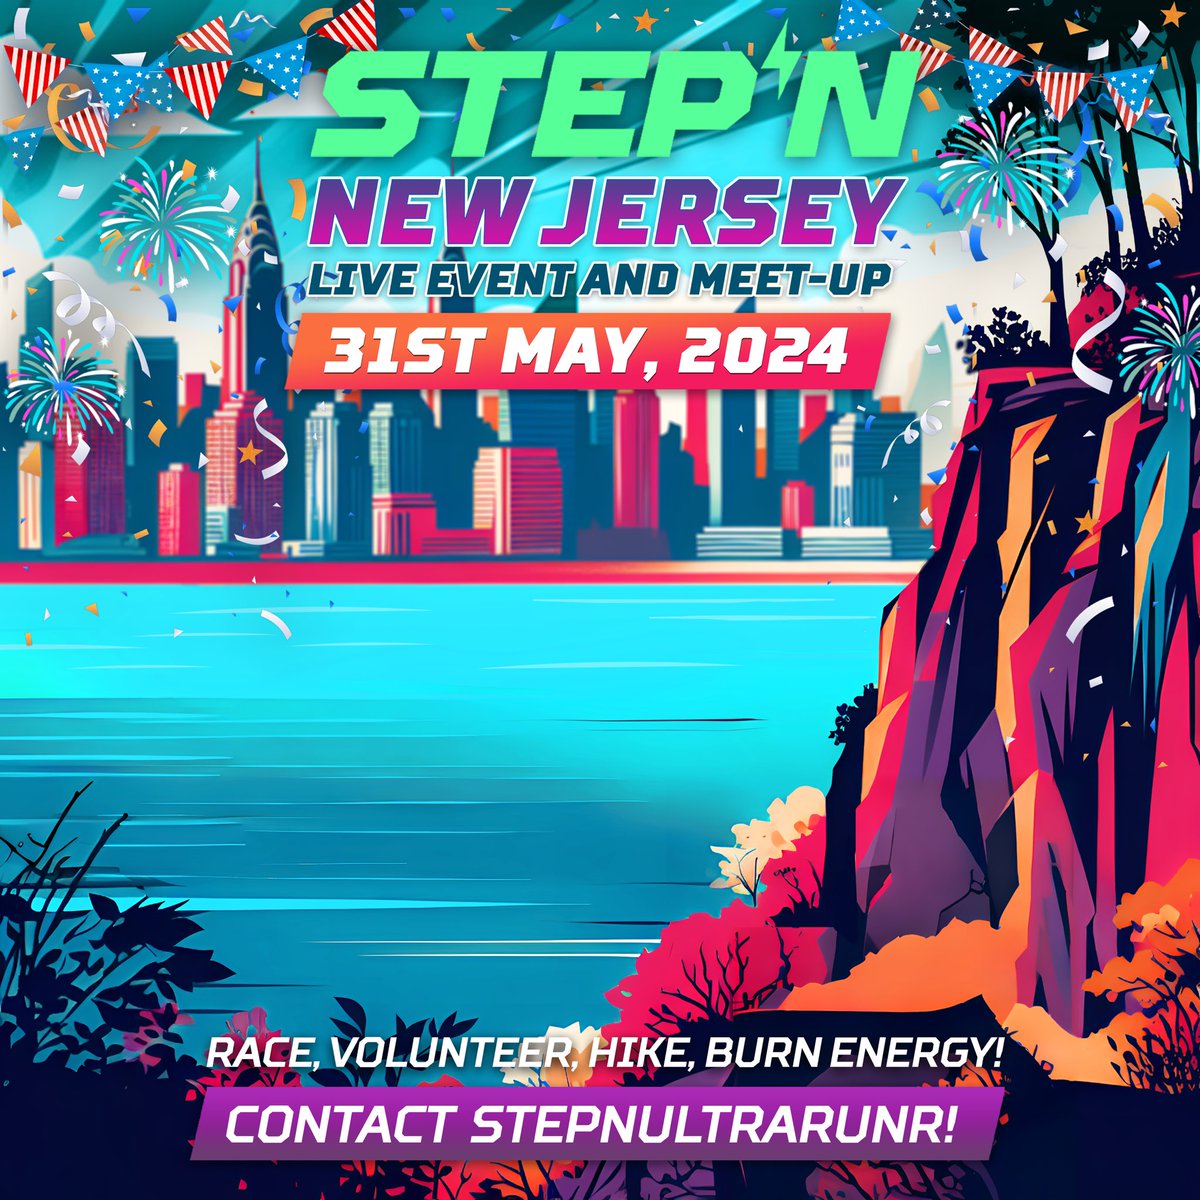 🗽NYC Trail Festival is this Friday at Ross Dock next to the NJ Palisades⚡️We have a few @Stepnofficial Runners who are racing, hiking, volunteering or hanging out🏃‍♂️🏃‍♀️

👟Contact me for more details!📞

@fslweb3 @GasHeroOfficial @mooarofficial #STEPN